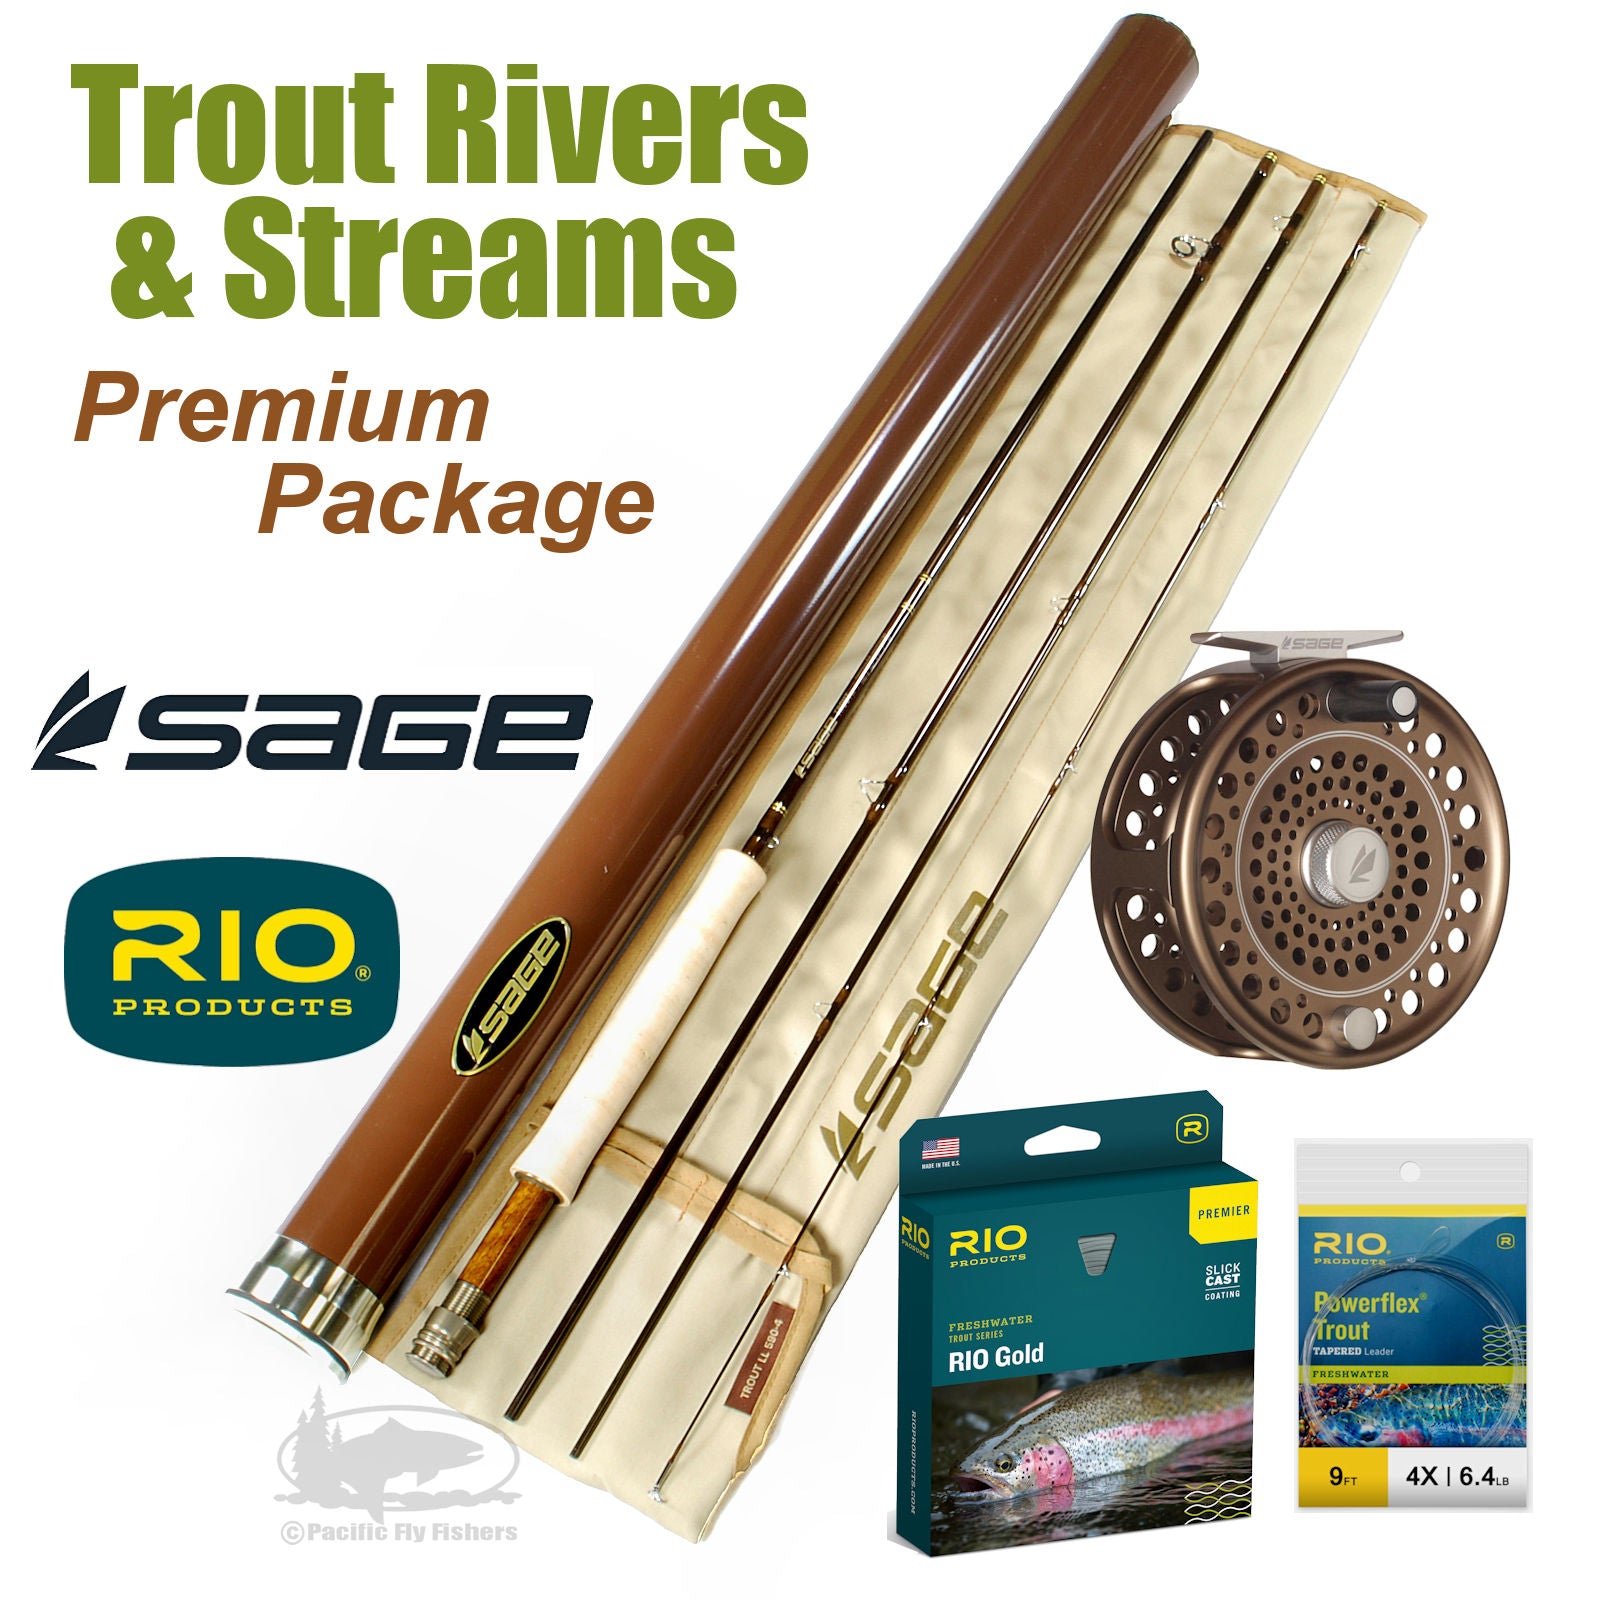 https://cdn.shopify.com/s/files/1/0211/7110/files/trout-rivers-premium-sage-rod-and-reel-outfit.jpg